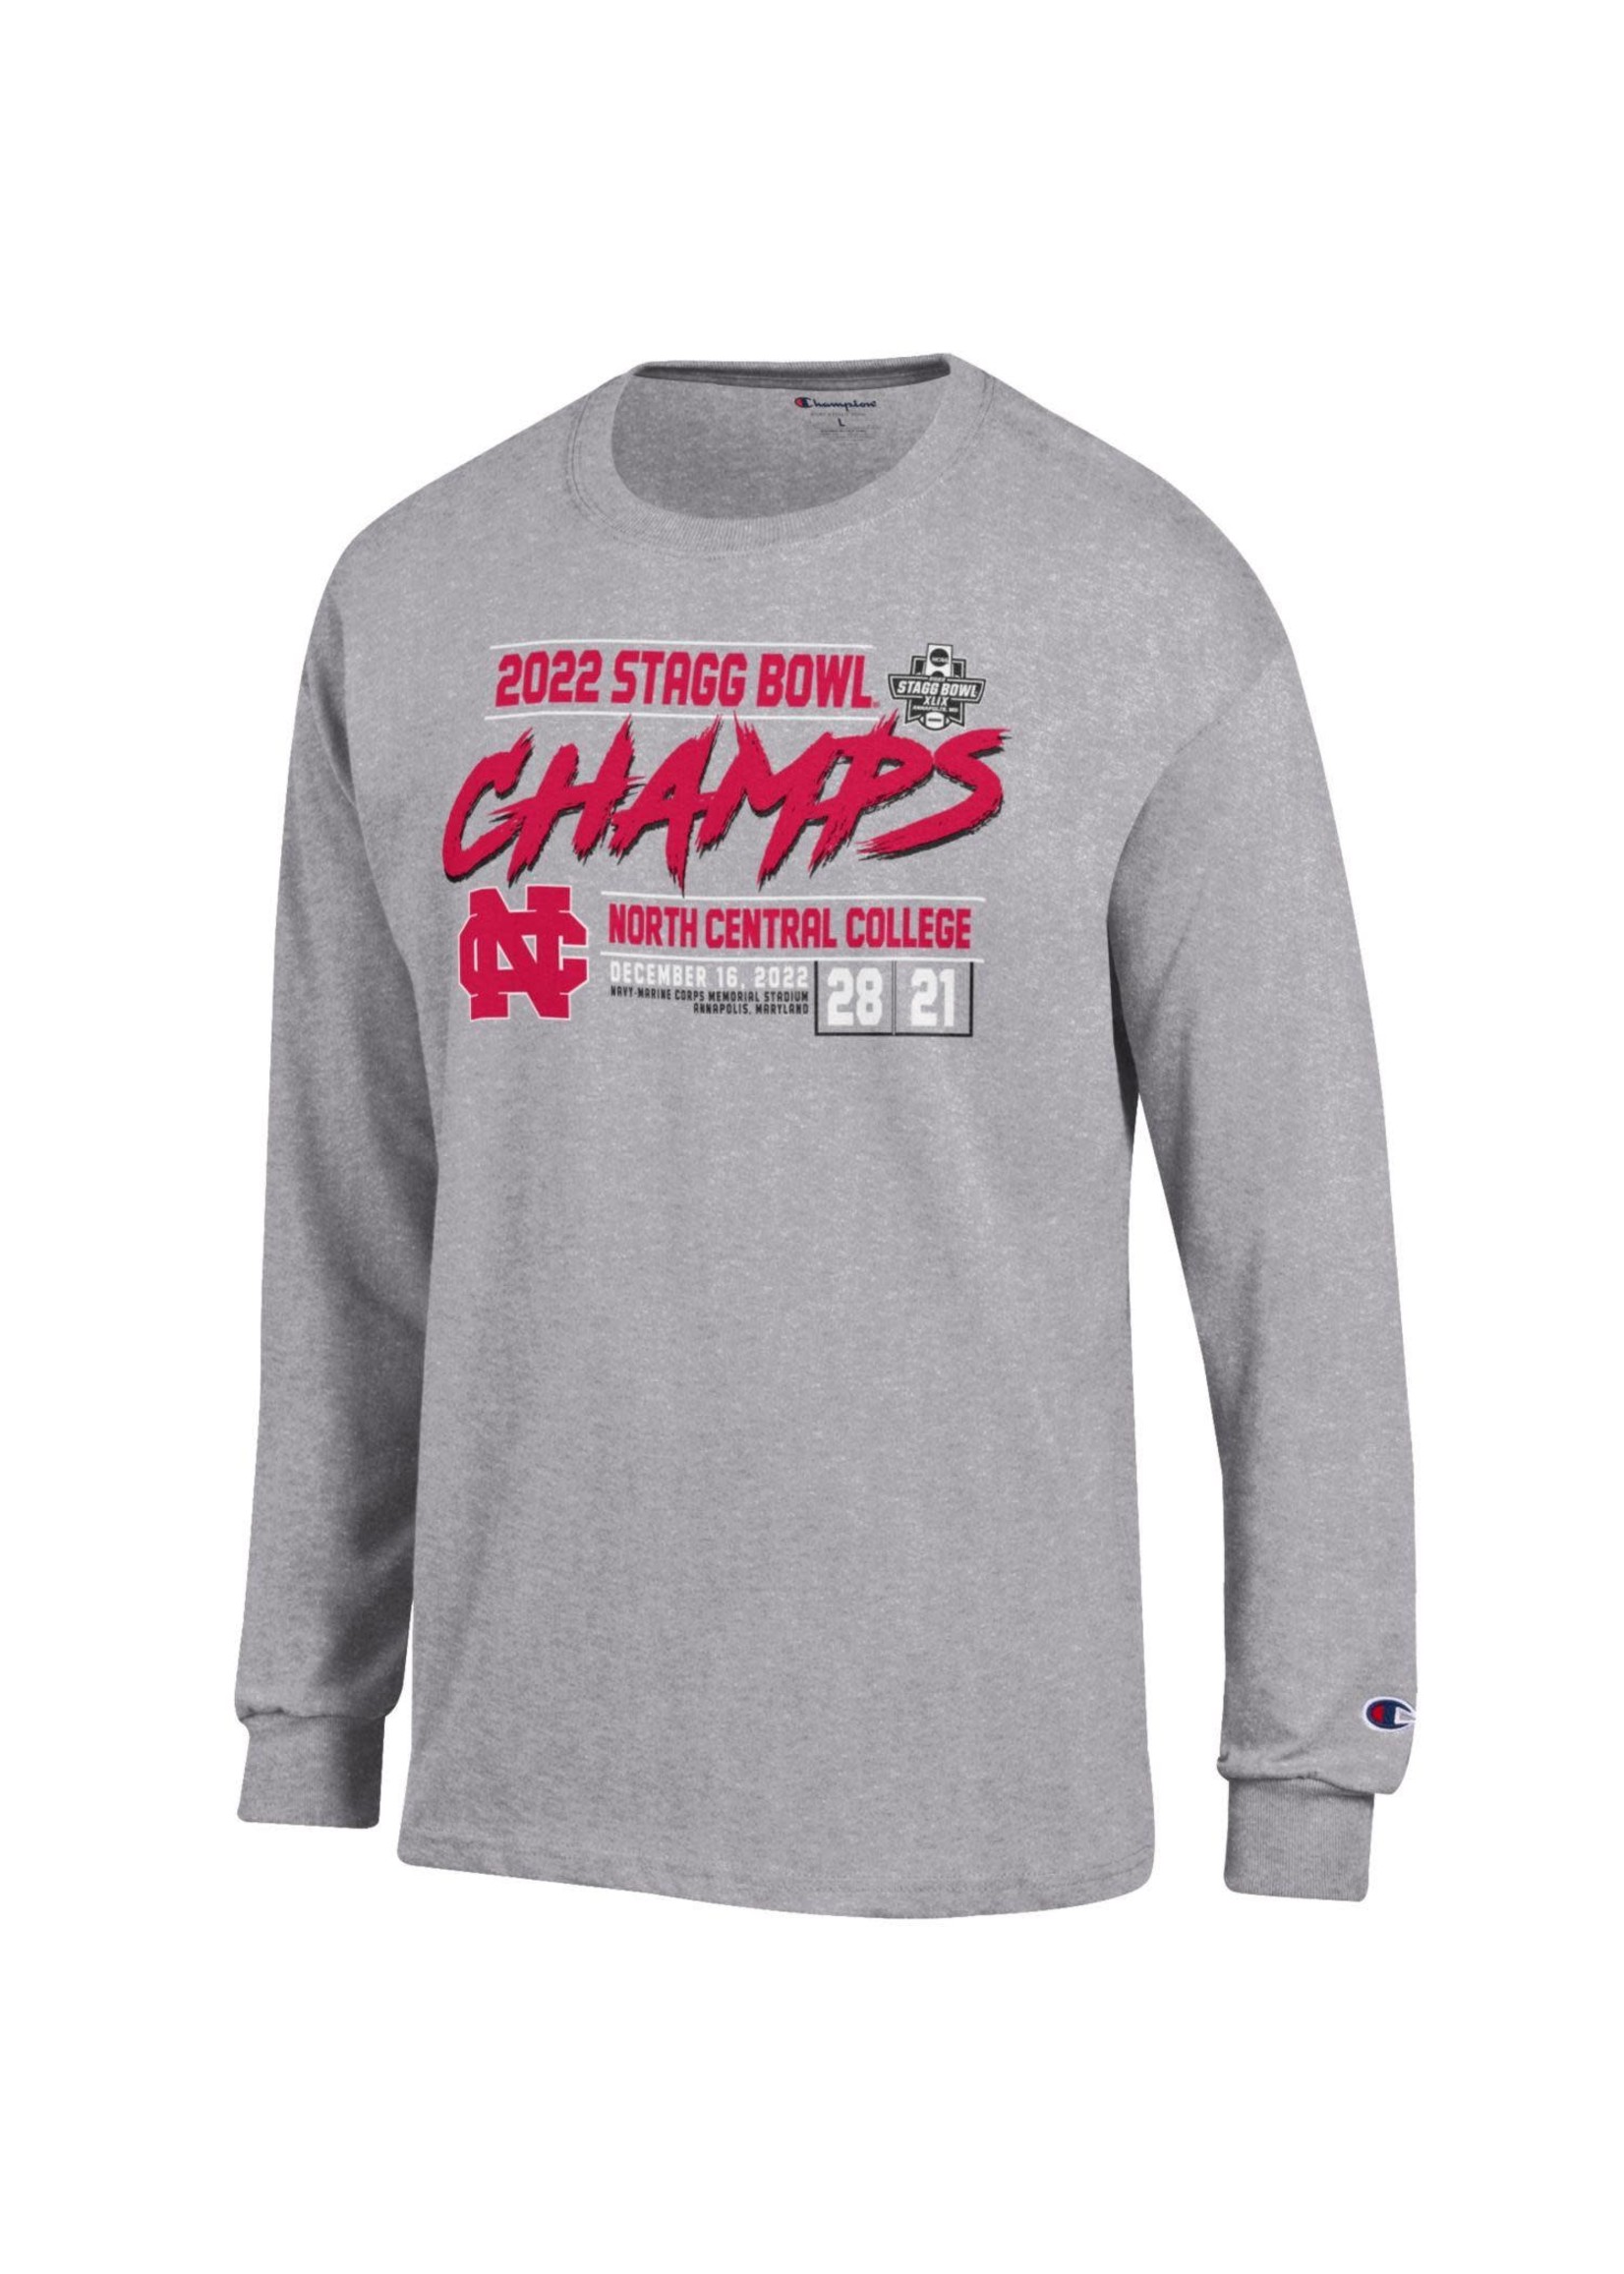 North - Tee Campus Sleeve 2022 Central by Champion College Store w/score Bowl Long Stagg